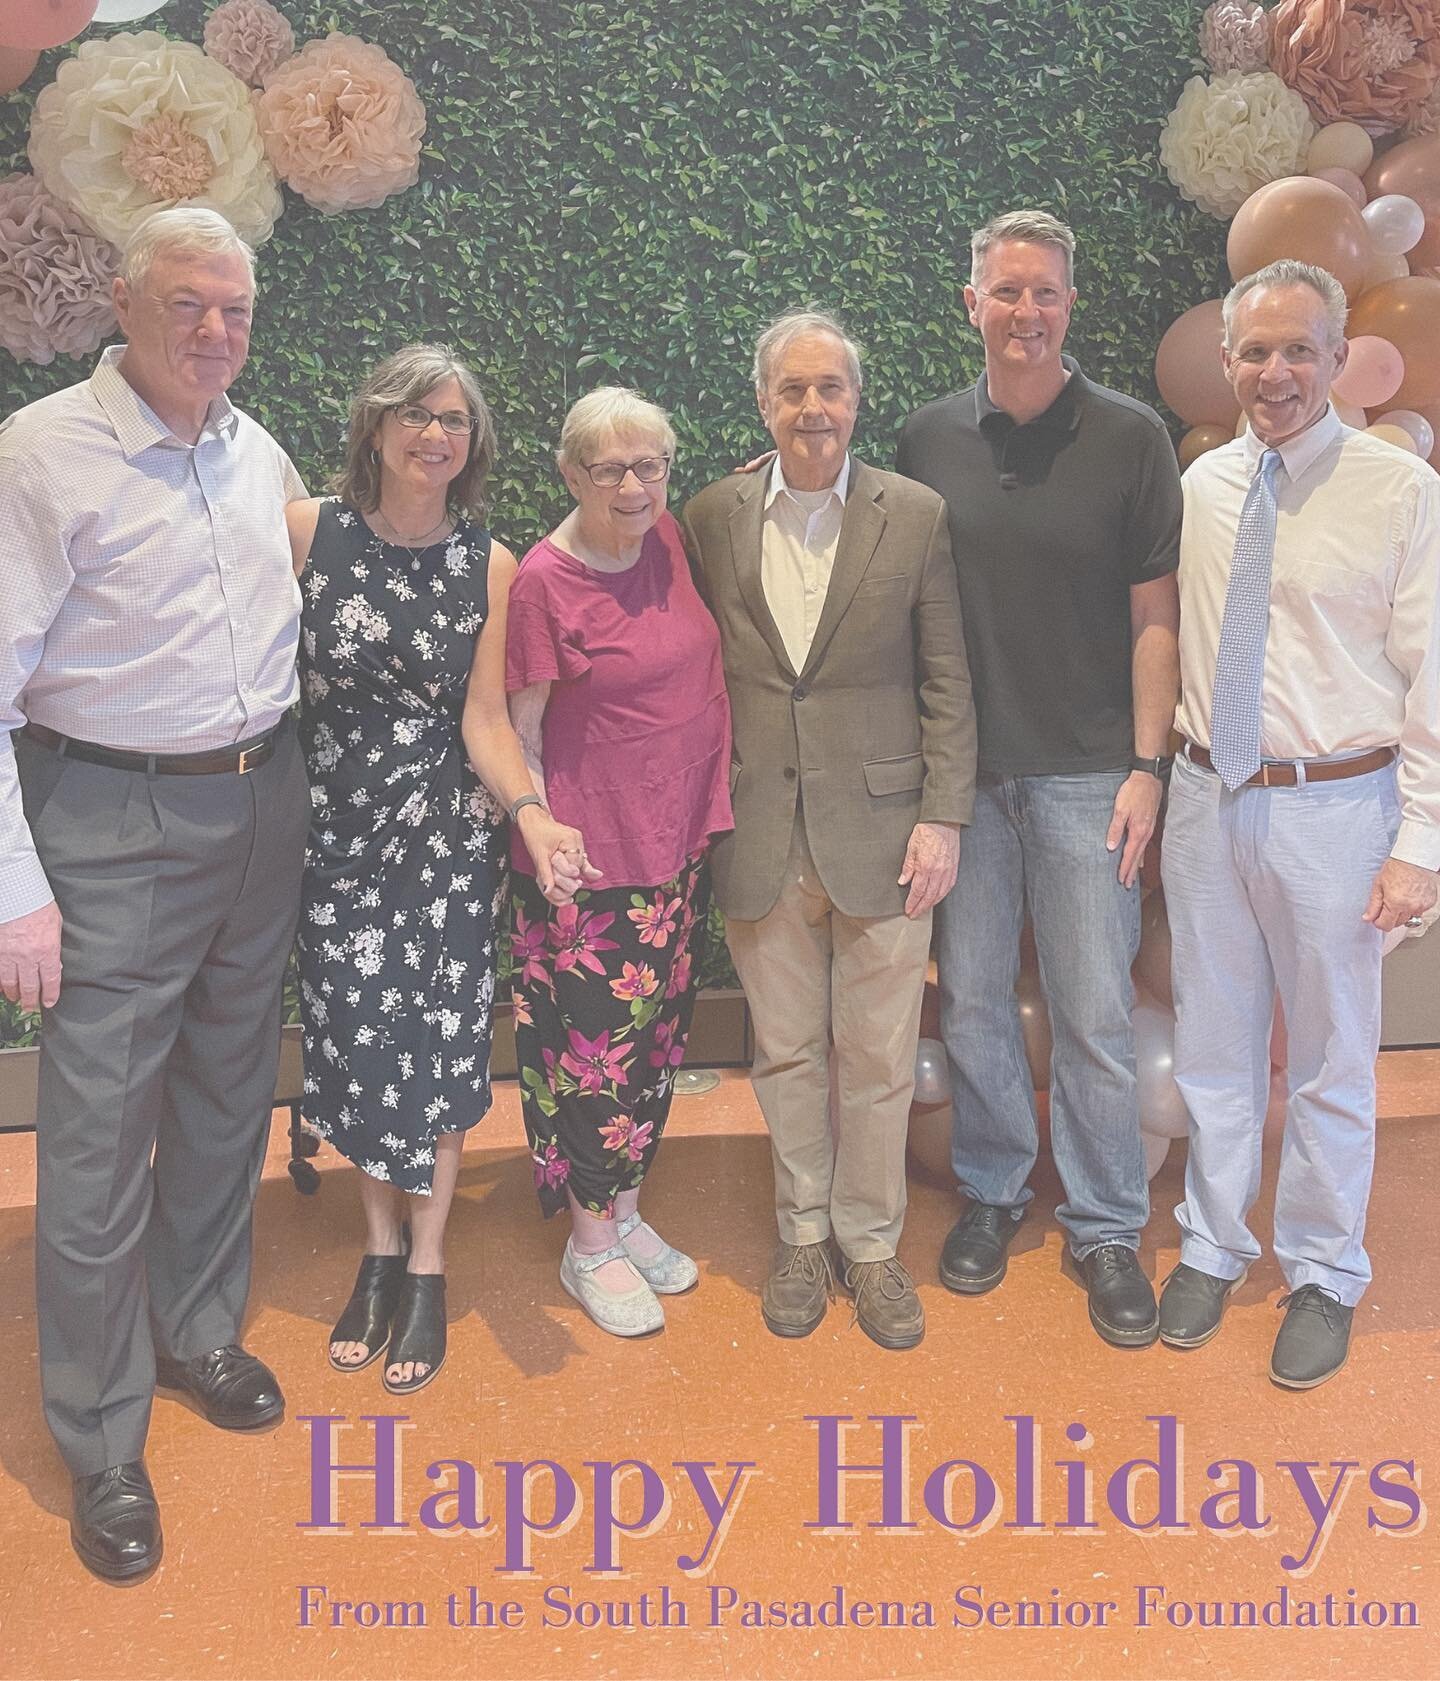 Happy Holidays from the Board of the South Pasadena Senior Foundation. 

We're grateful for our vibrant senior community, the hardworking and caring staff of the South Pasadena Senior Center, and all those who generously support our efforts to ensure